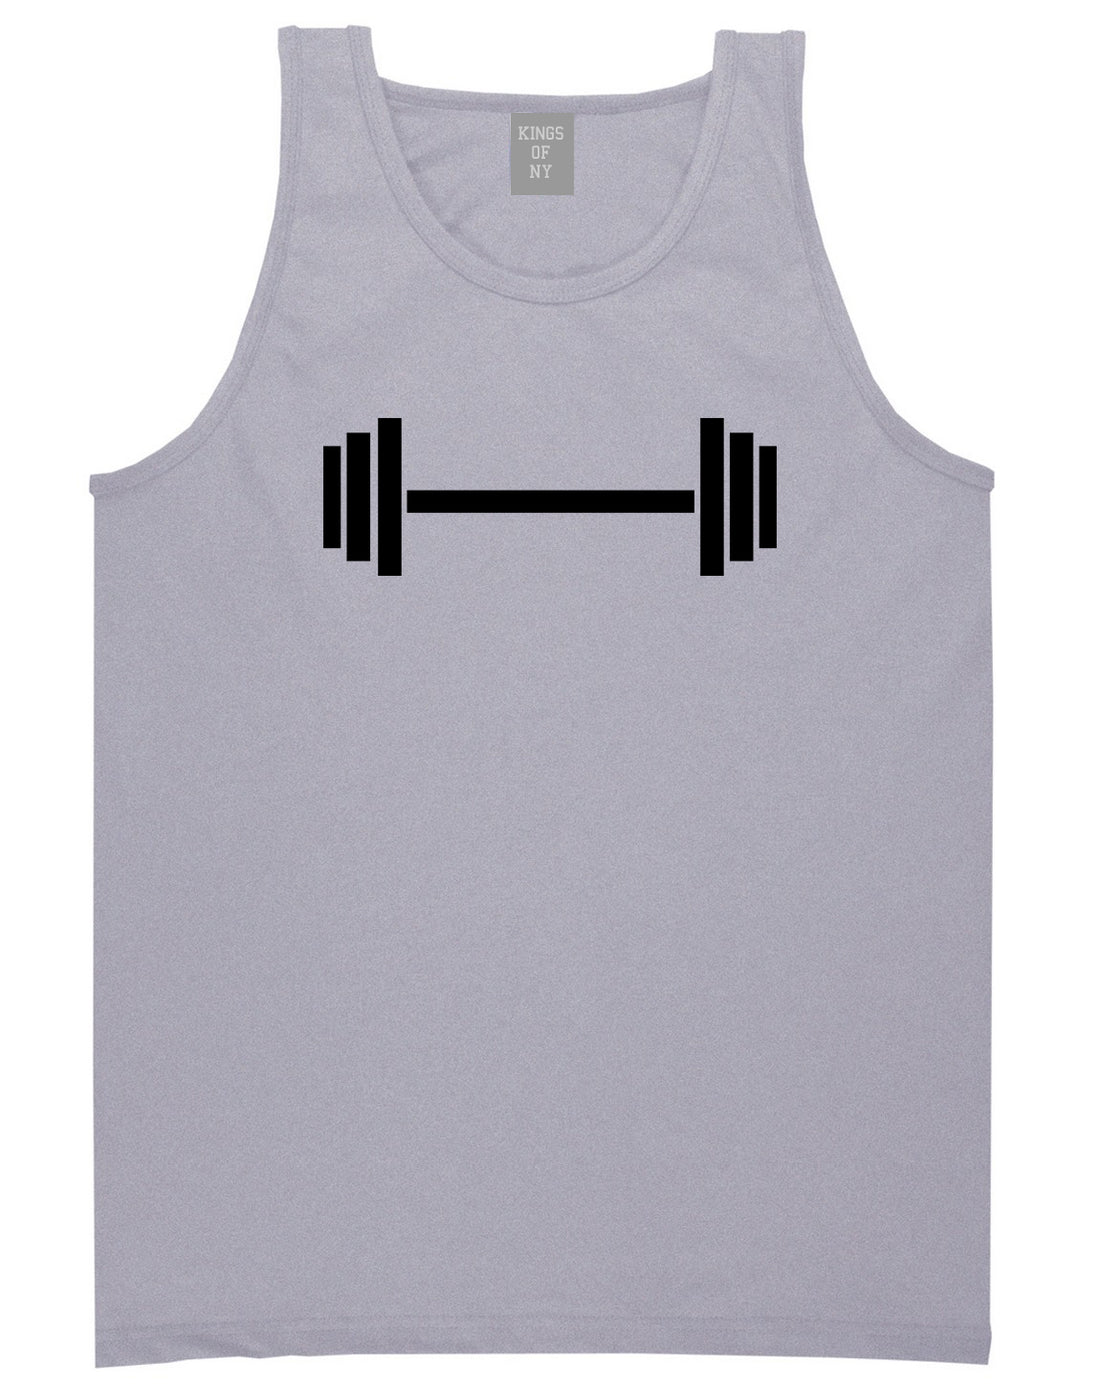 Barbell Workout Gym Grey Tank Top Shirt by Kings Of NY